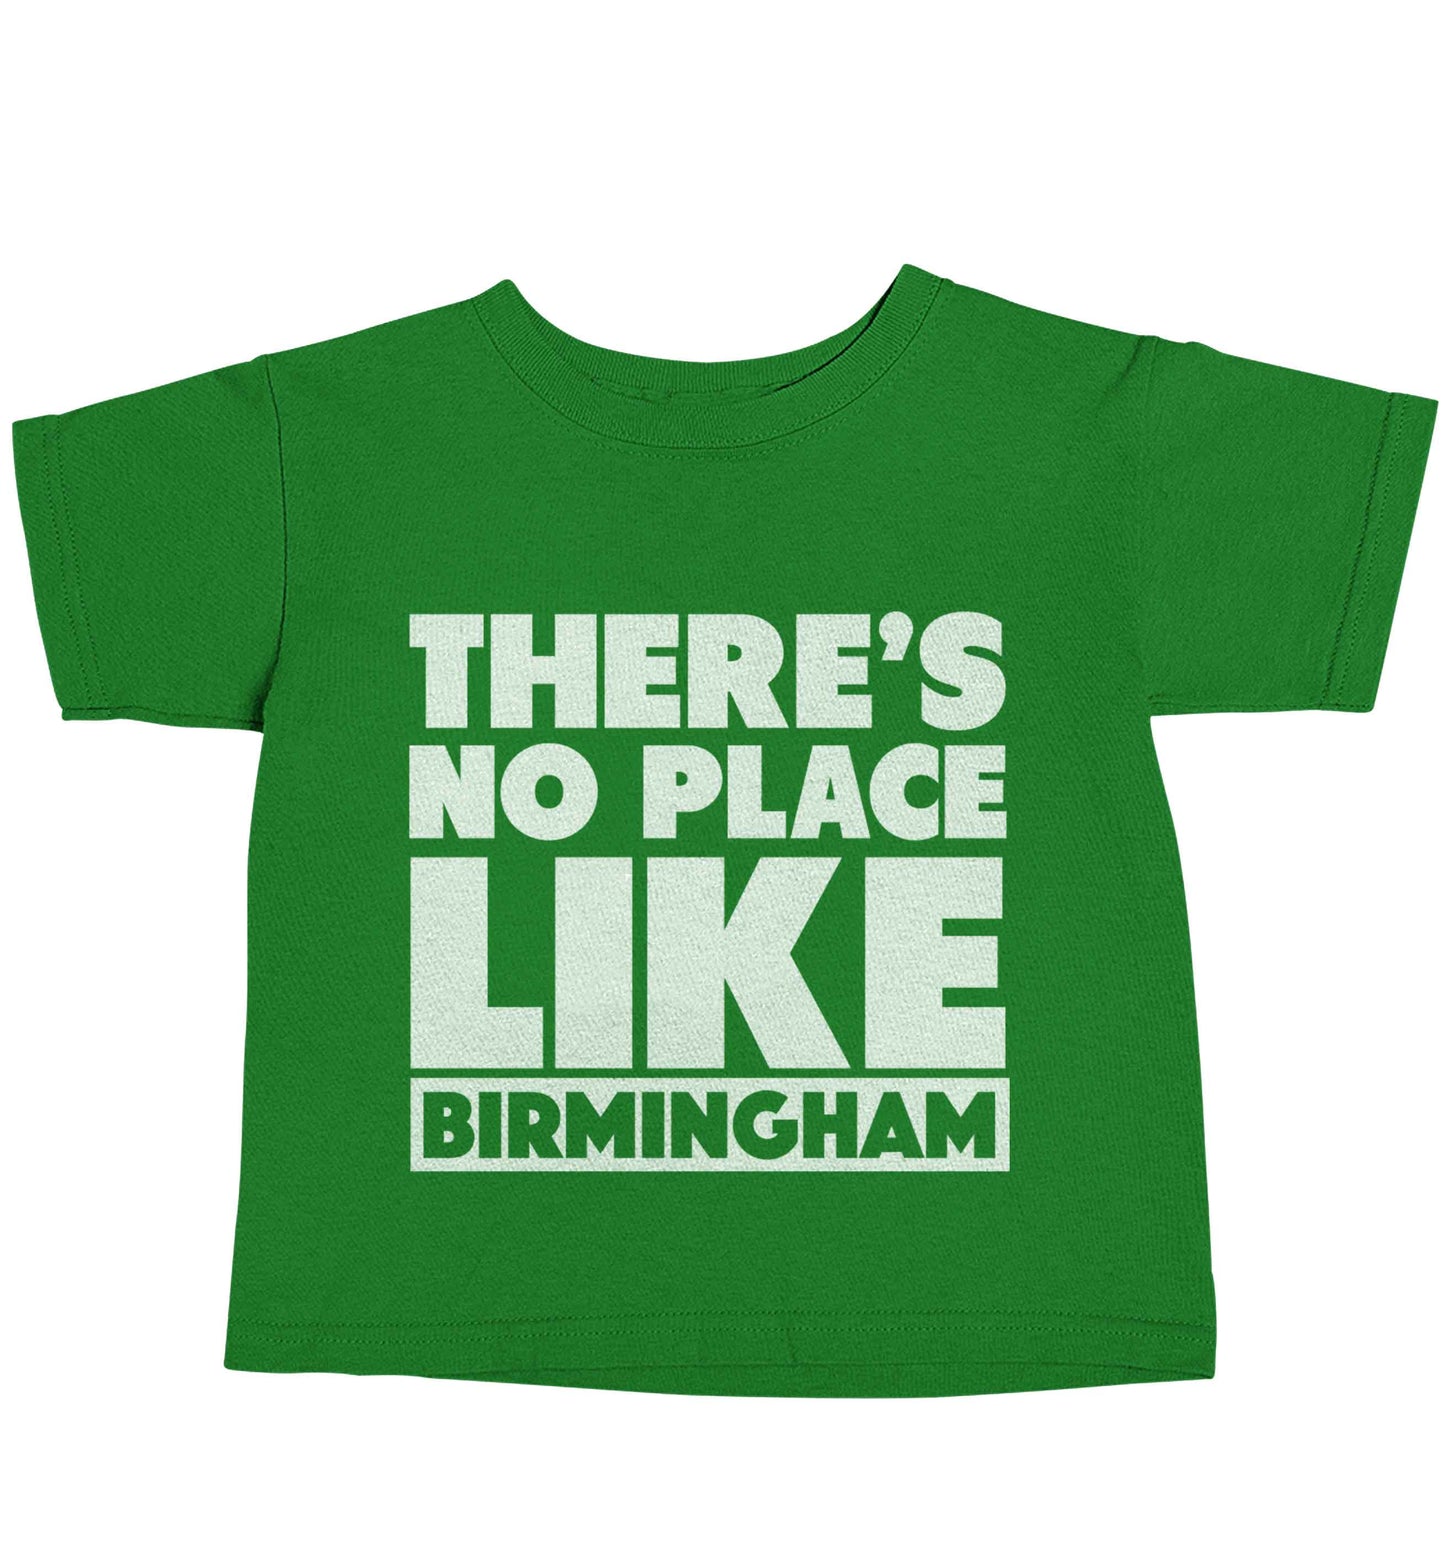 There's no place like Birmingham green baby toddler Tshirt 2 Years